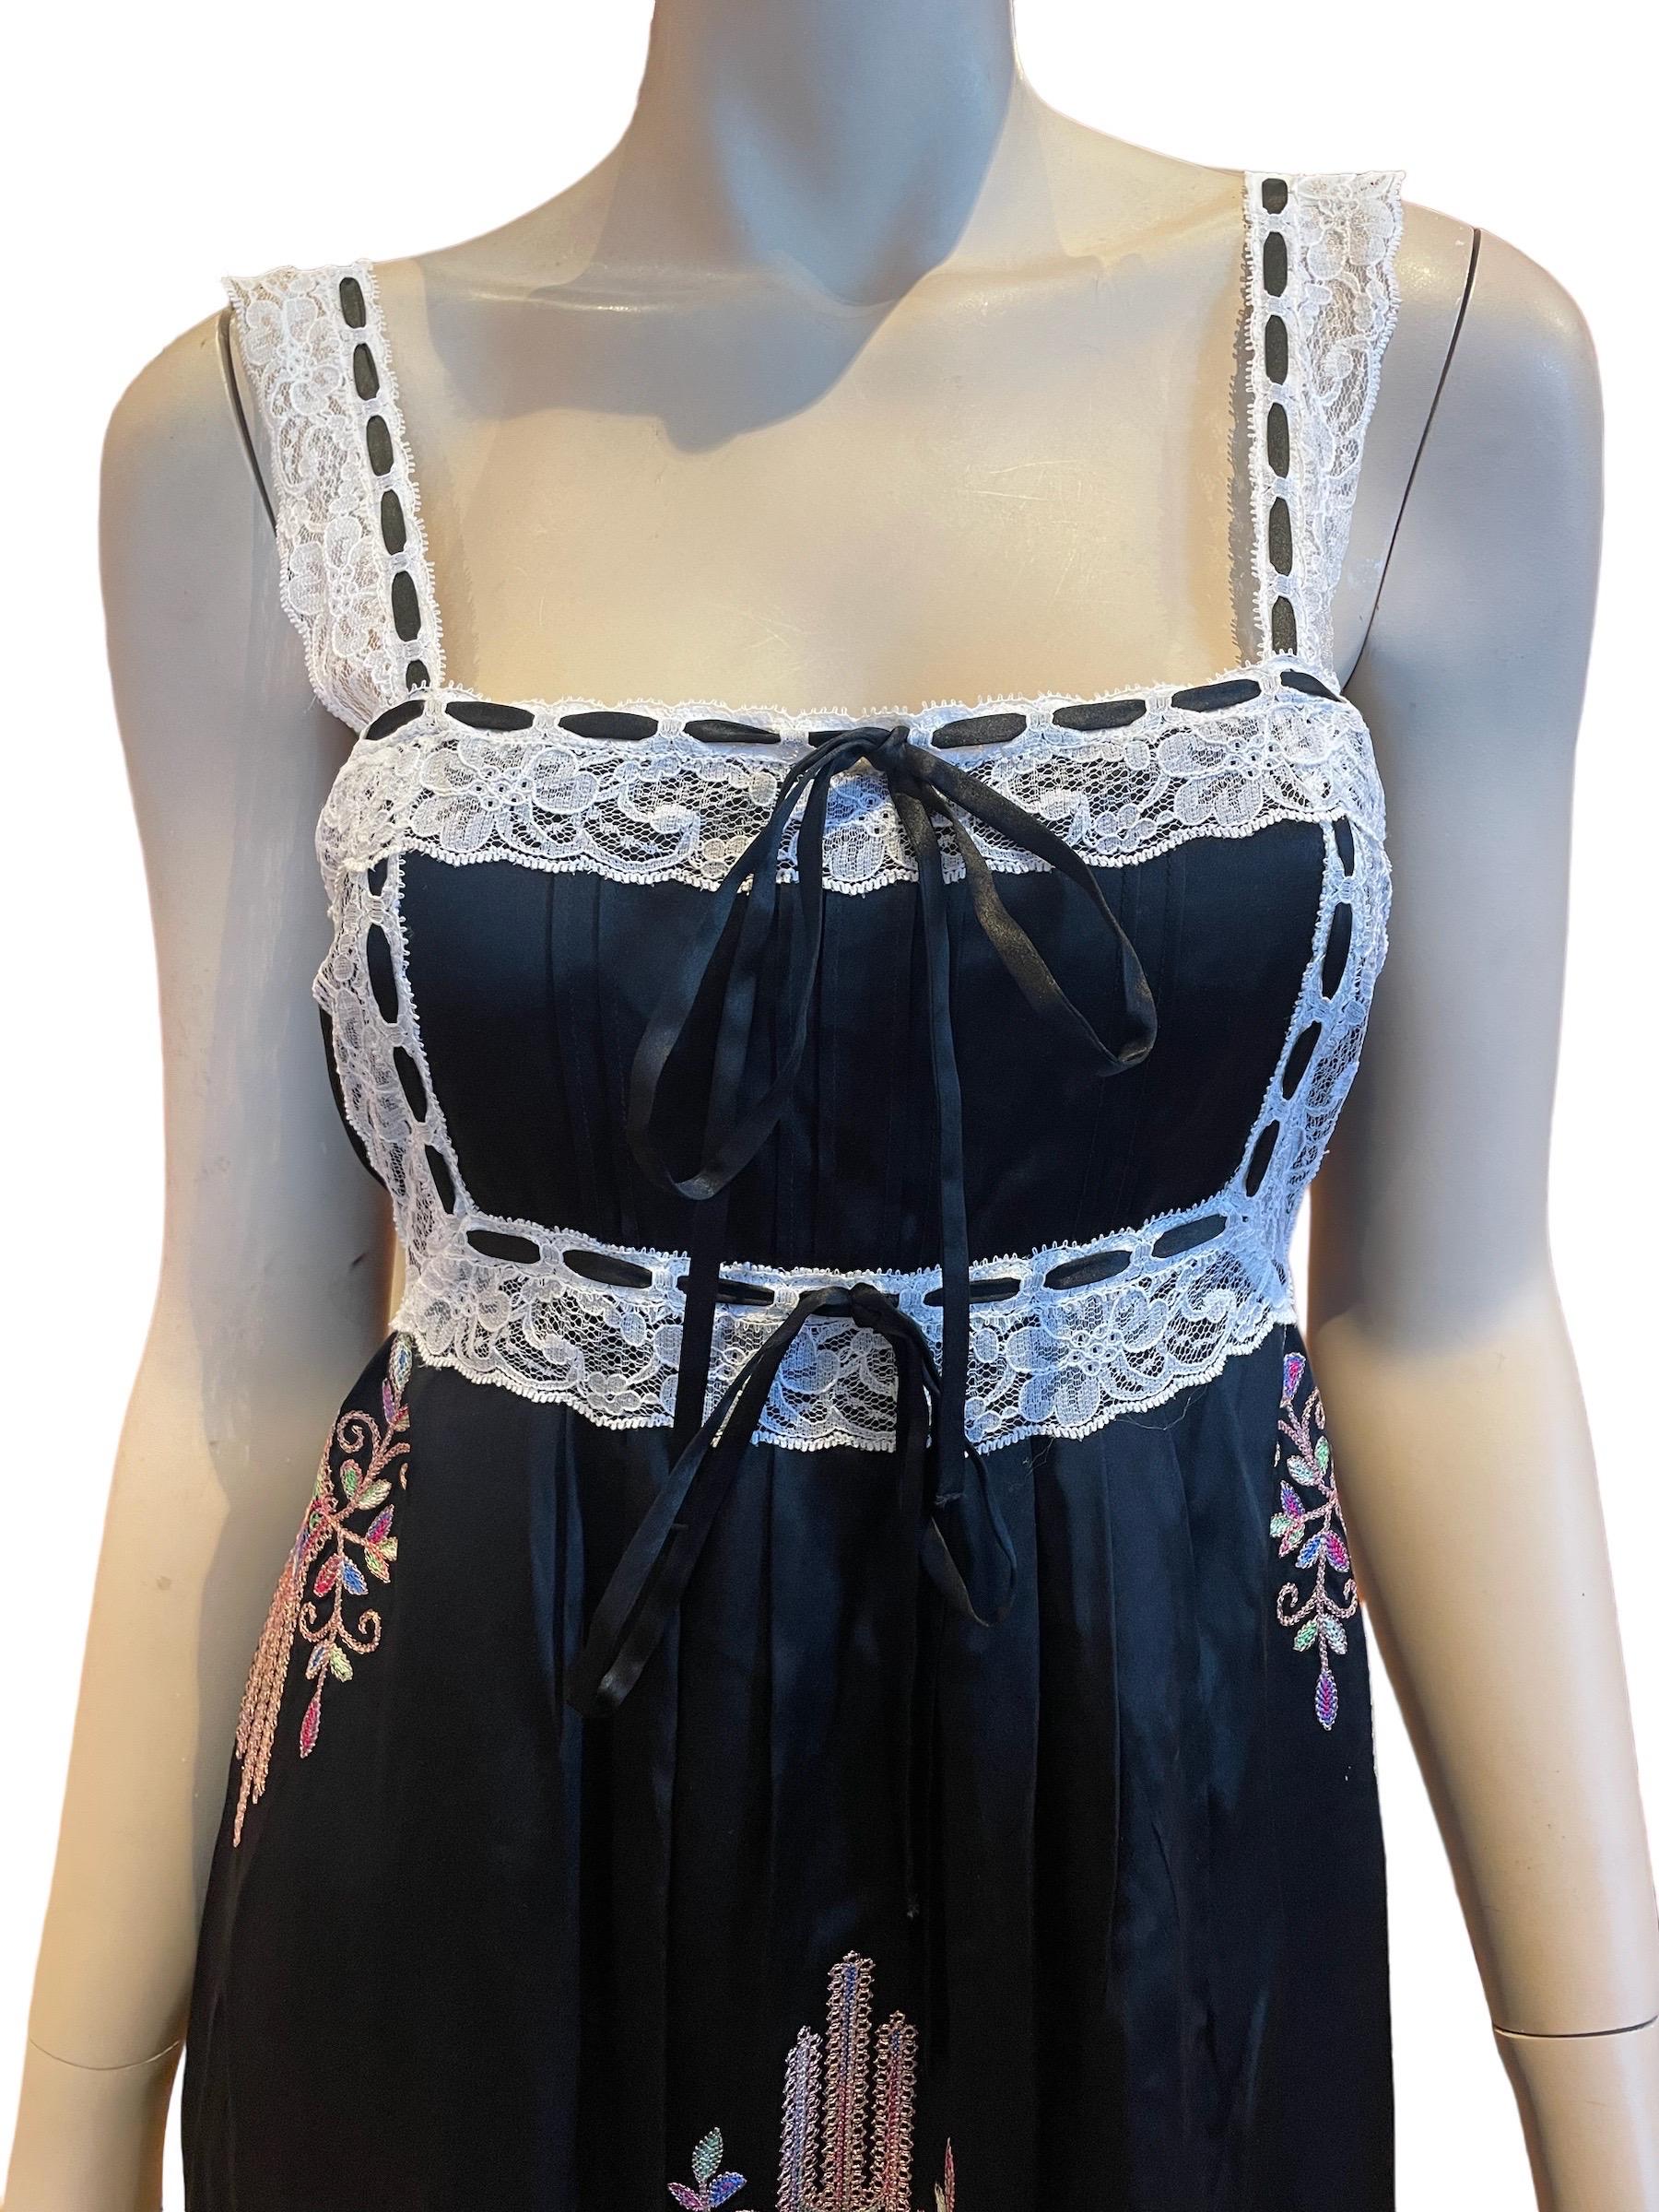 Y2K Black Betsey Johnson Baby Doll Slip Dress, Embroidered with Lace Trim Bodice 

Black Betsey Johnson babydoll slip dress with lace straps, adjustable satin ribbon eyelet tie bodice, and pink-green-blue embroidery. Hidden side zipper, midi length. 